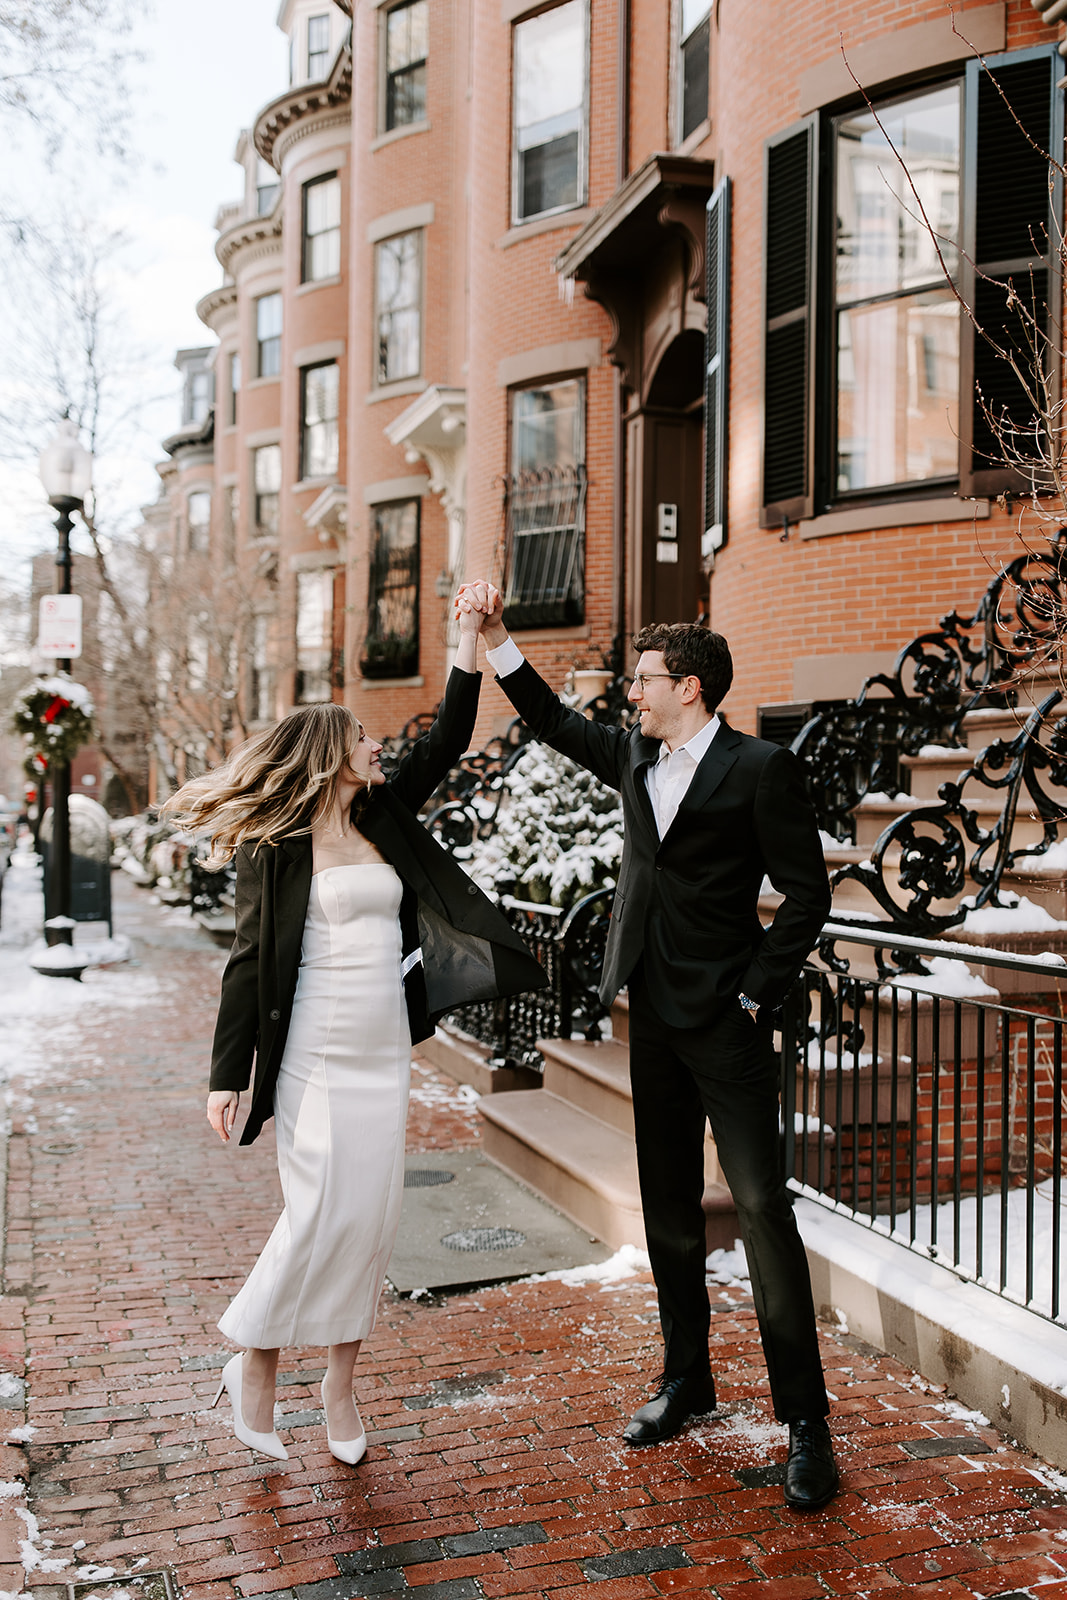 Stunning bride and groom pose together in Boston after their dreamy winter elopement at the Boston Public Library!